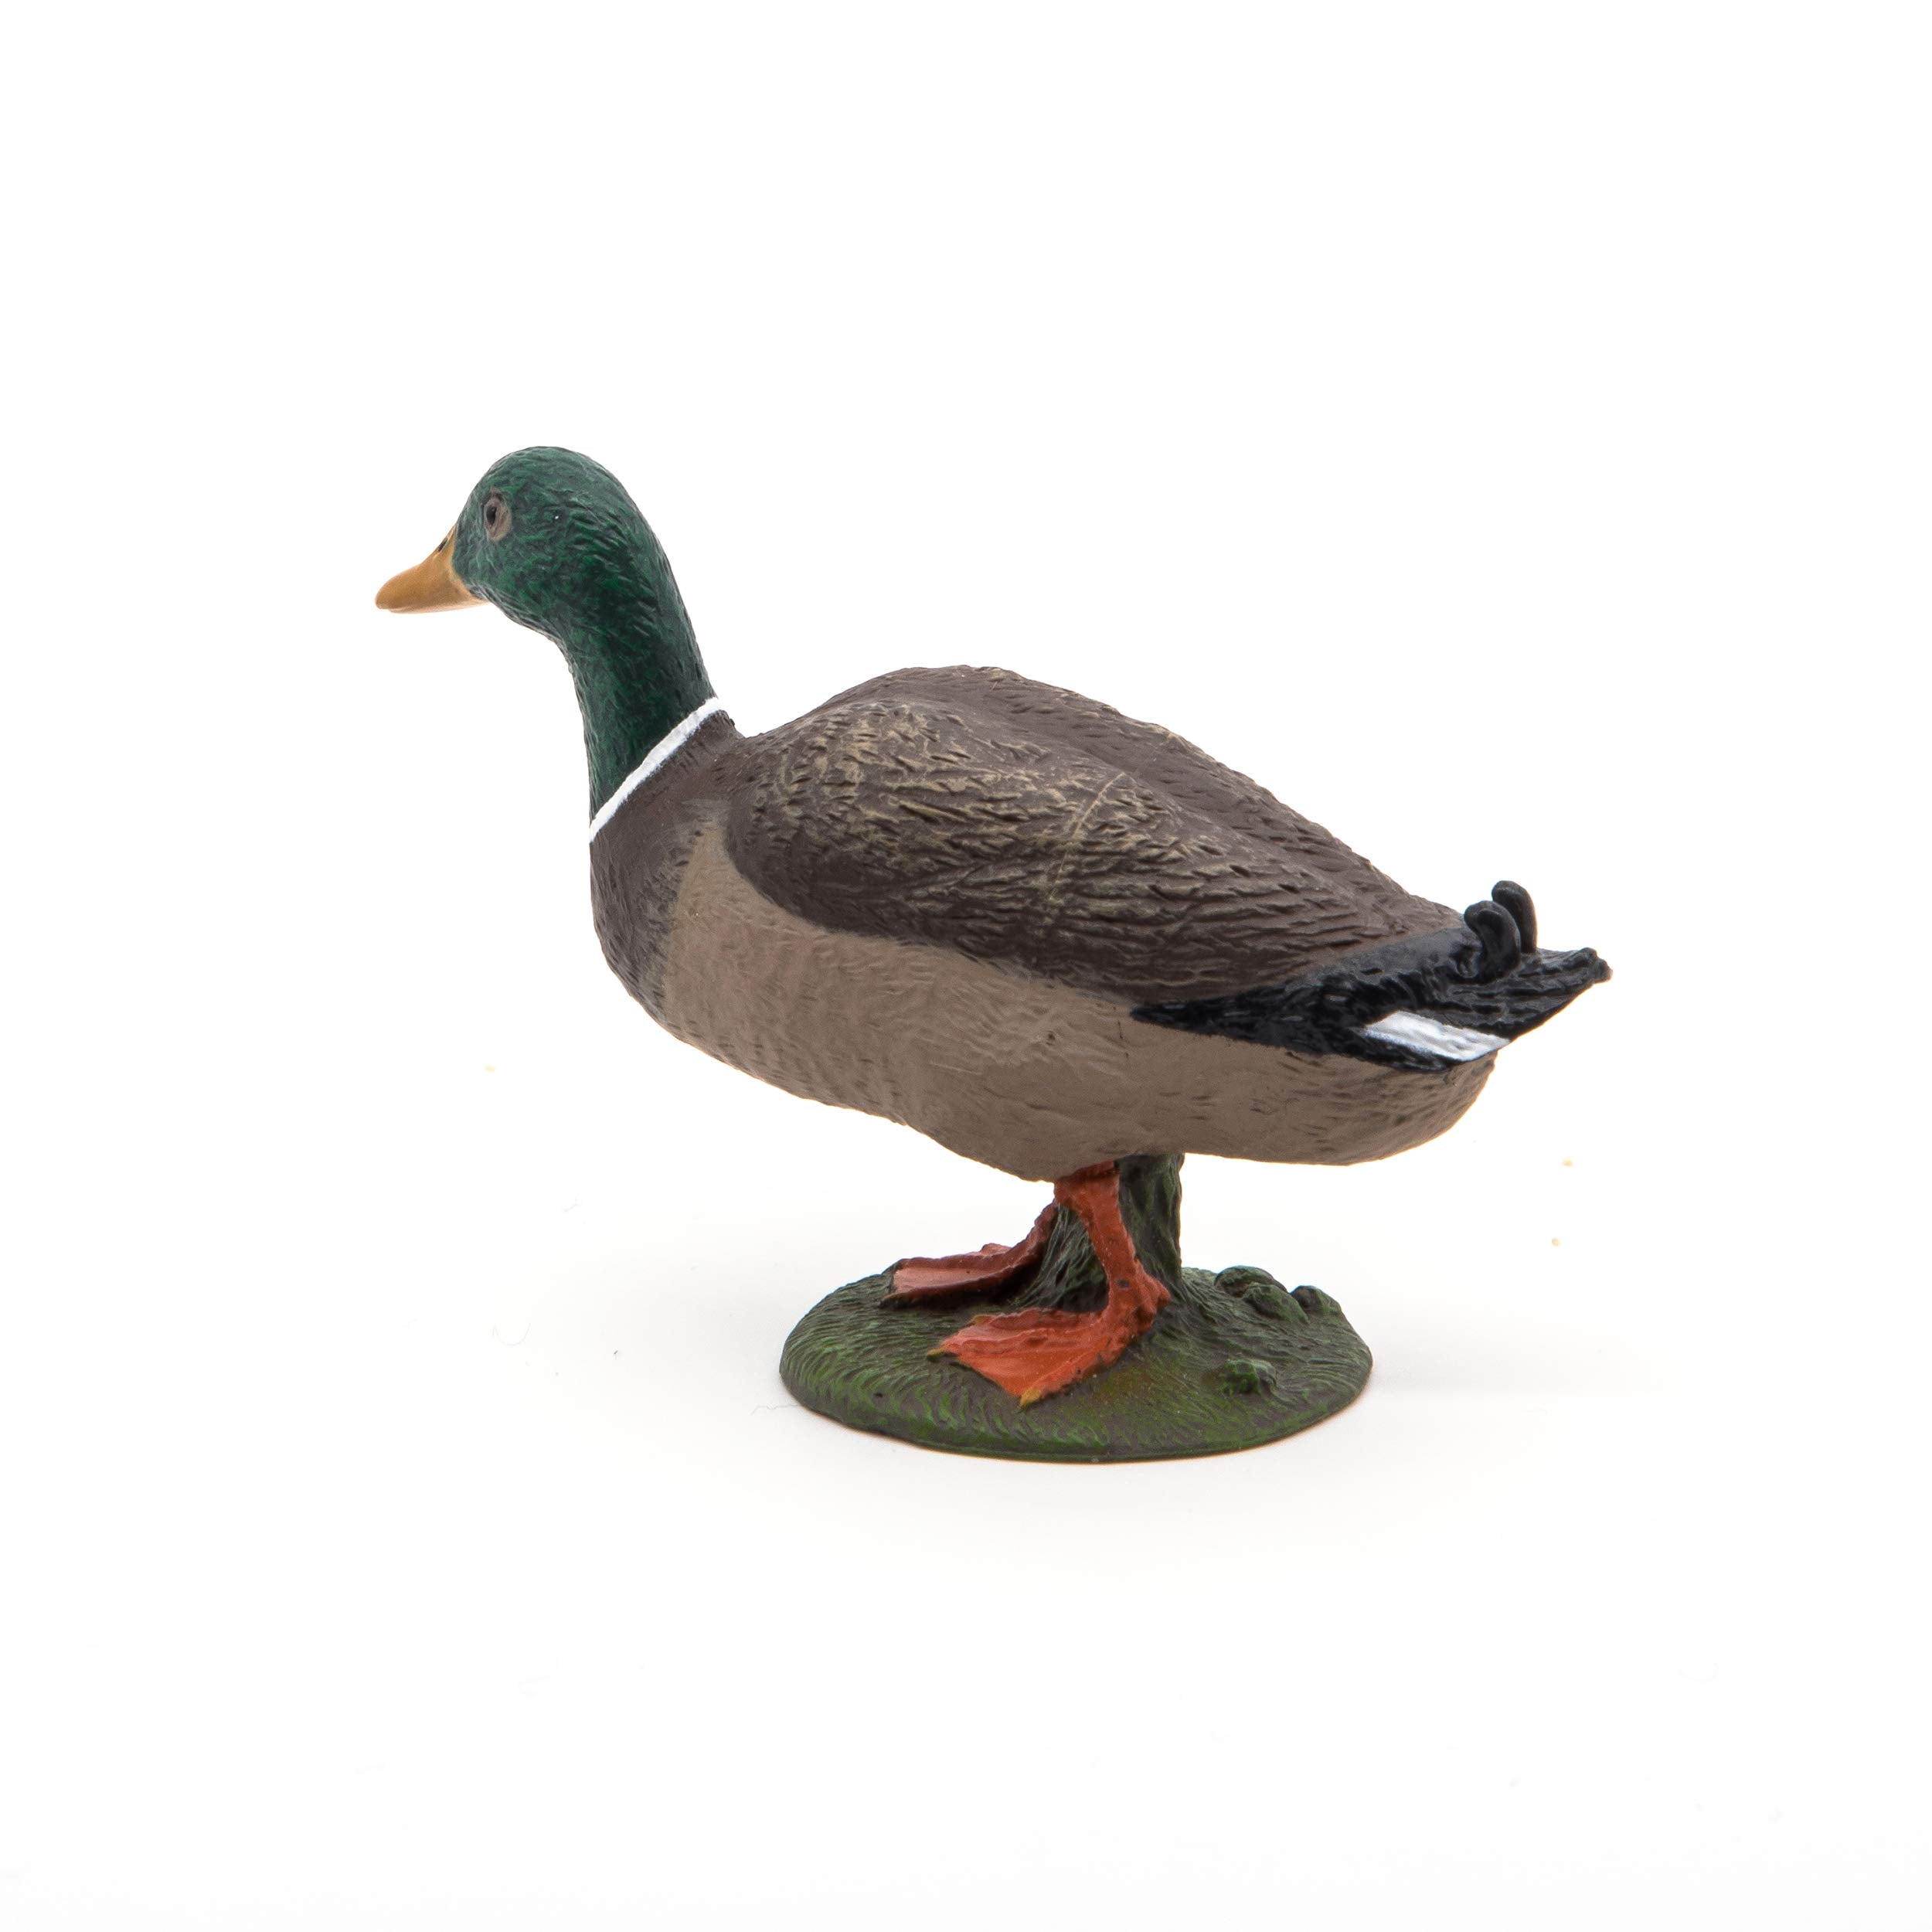 Mallard Duck Play Animal Figure by Papo Figures 51155 for sale online 